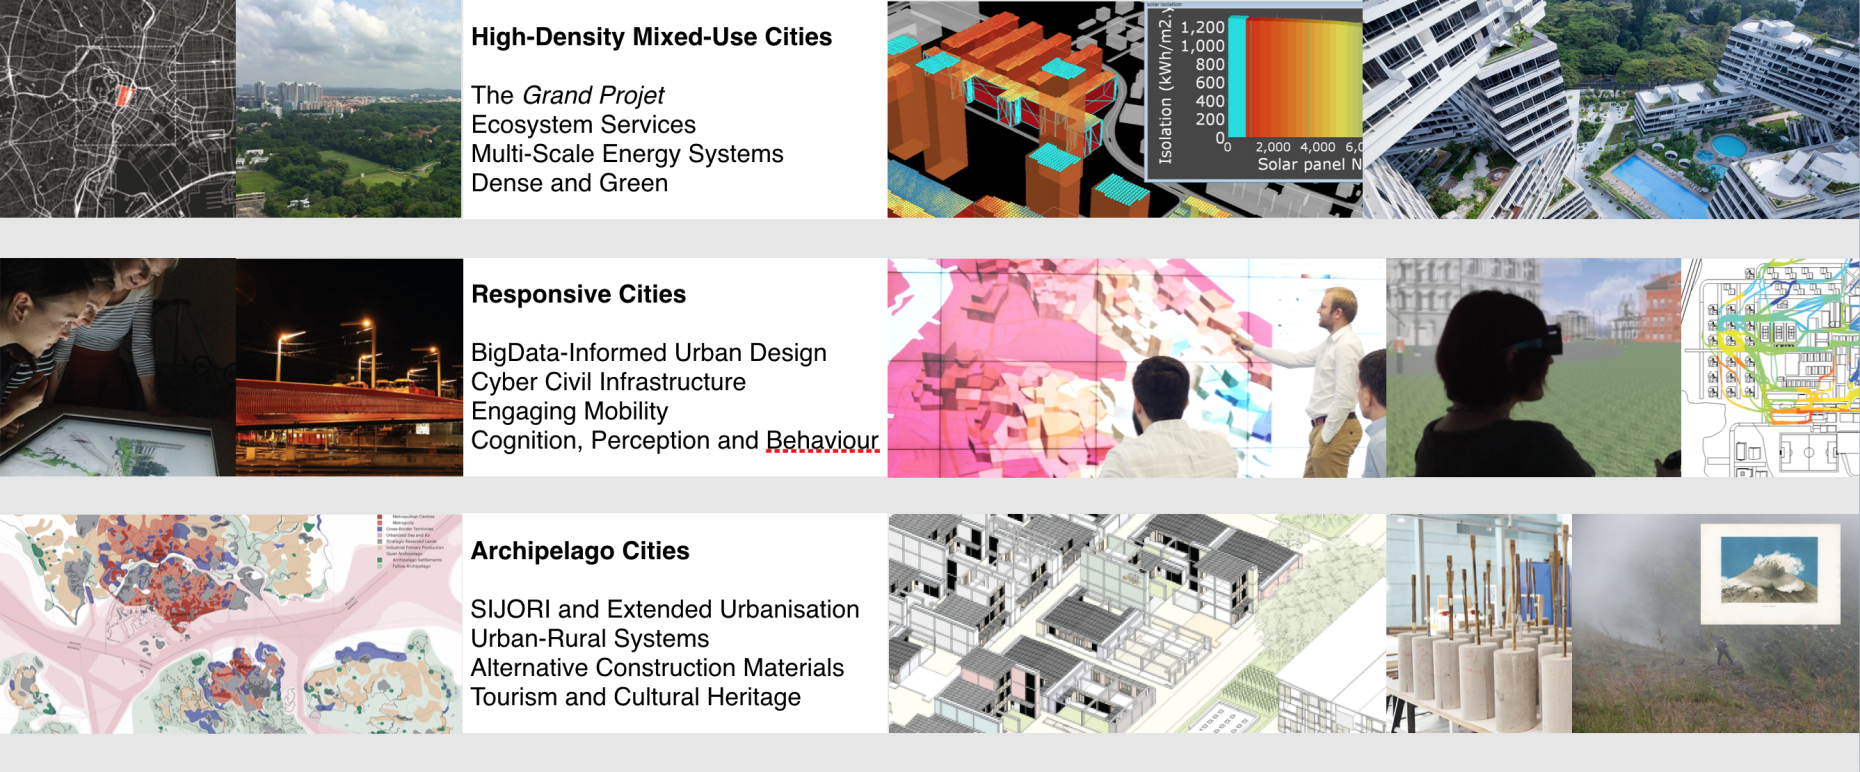 High-Density Mixed-Use Cities – Future Cities Laboratory